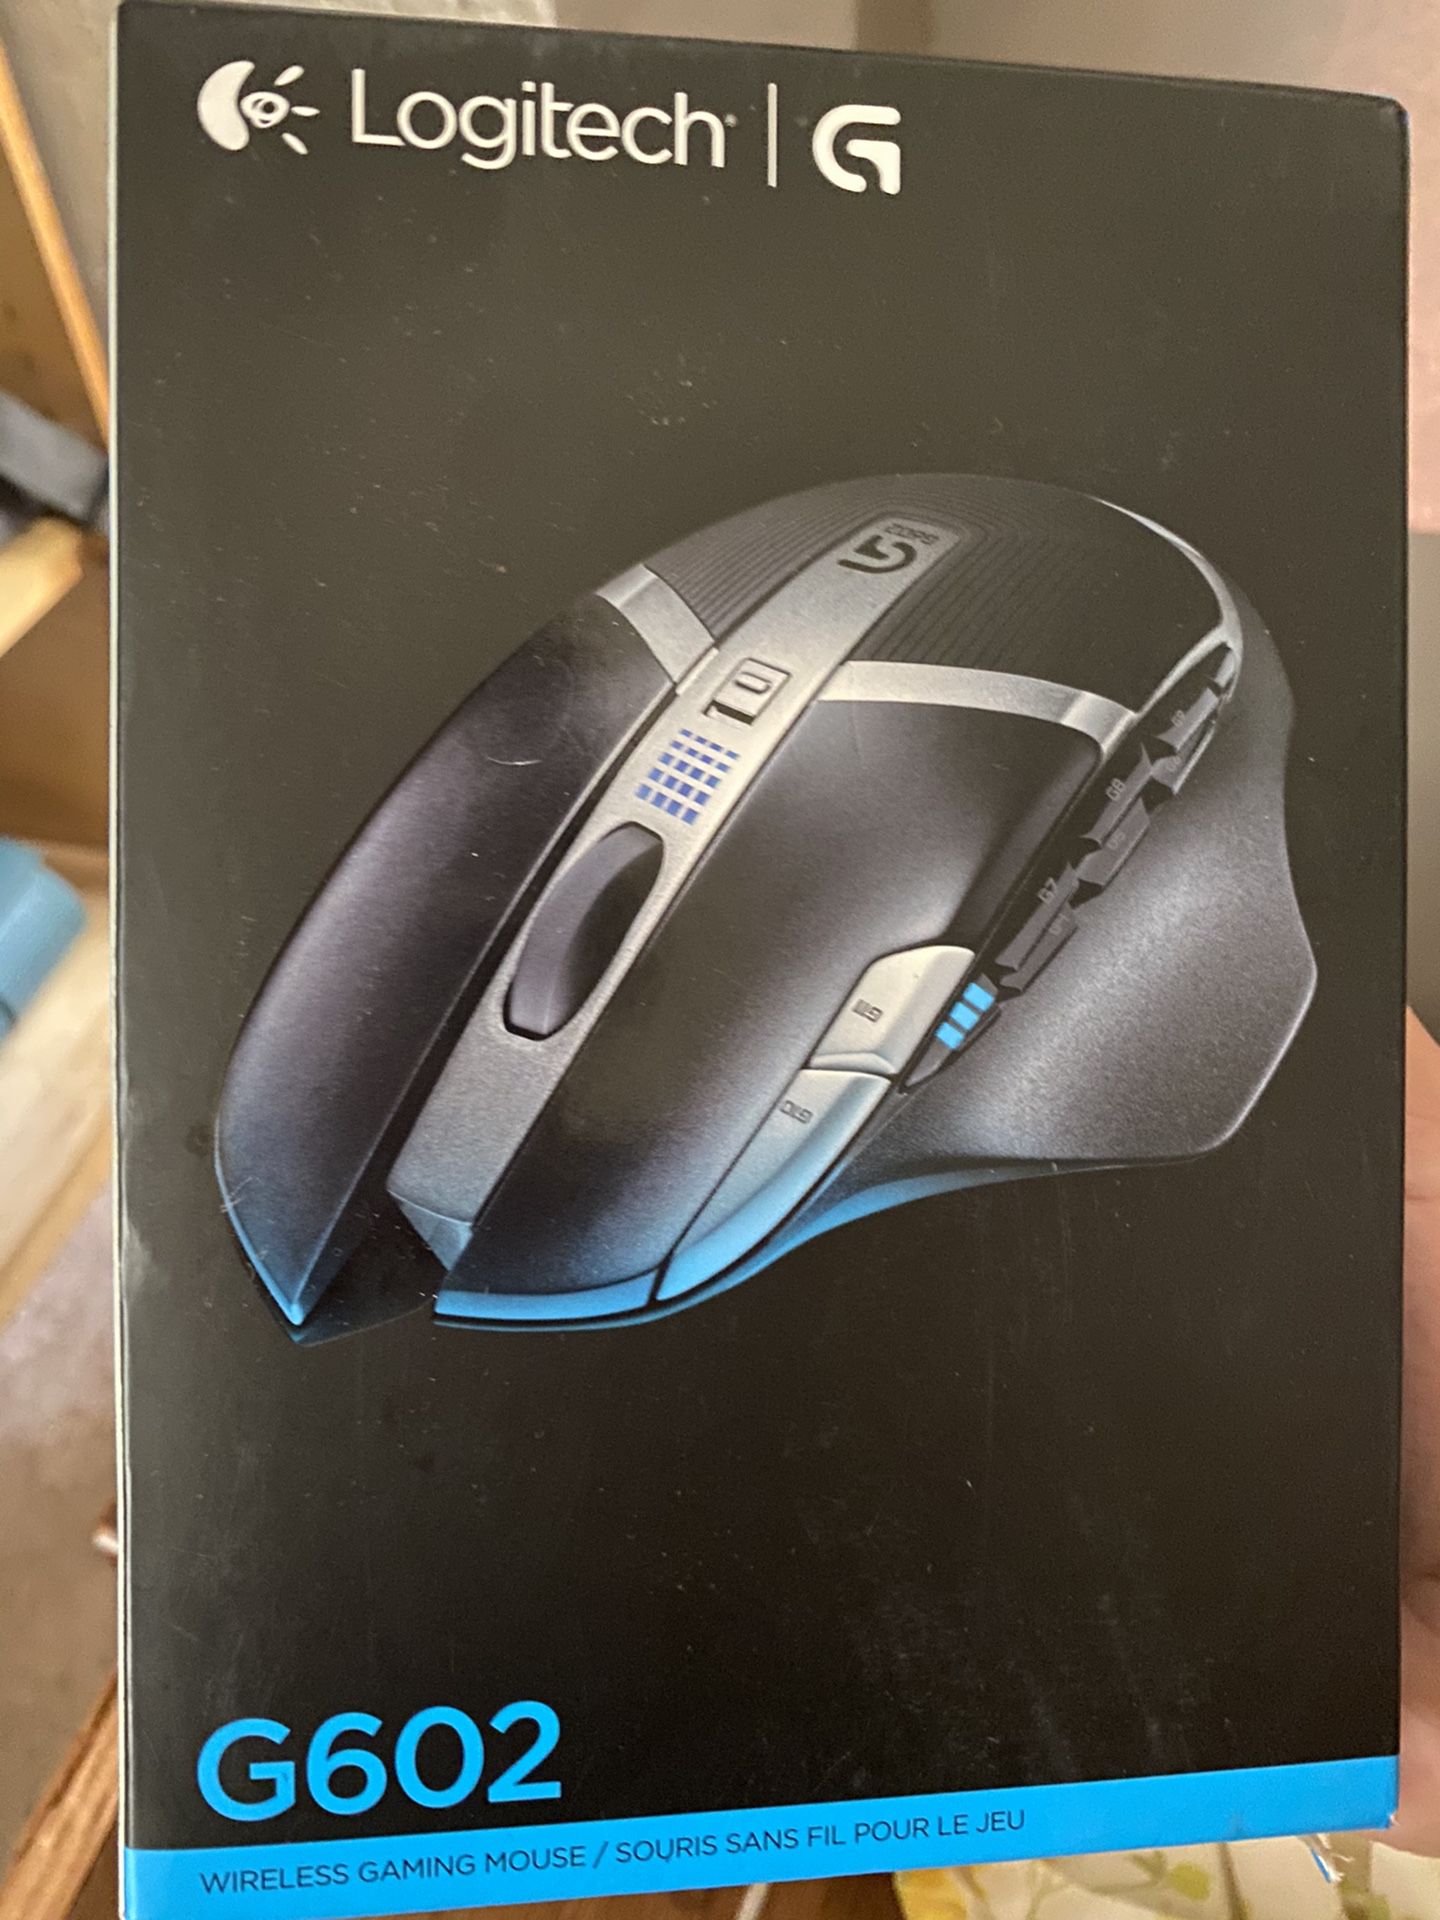 Logitech (G602) Wireless Gaming Mouse